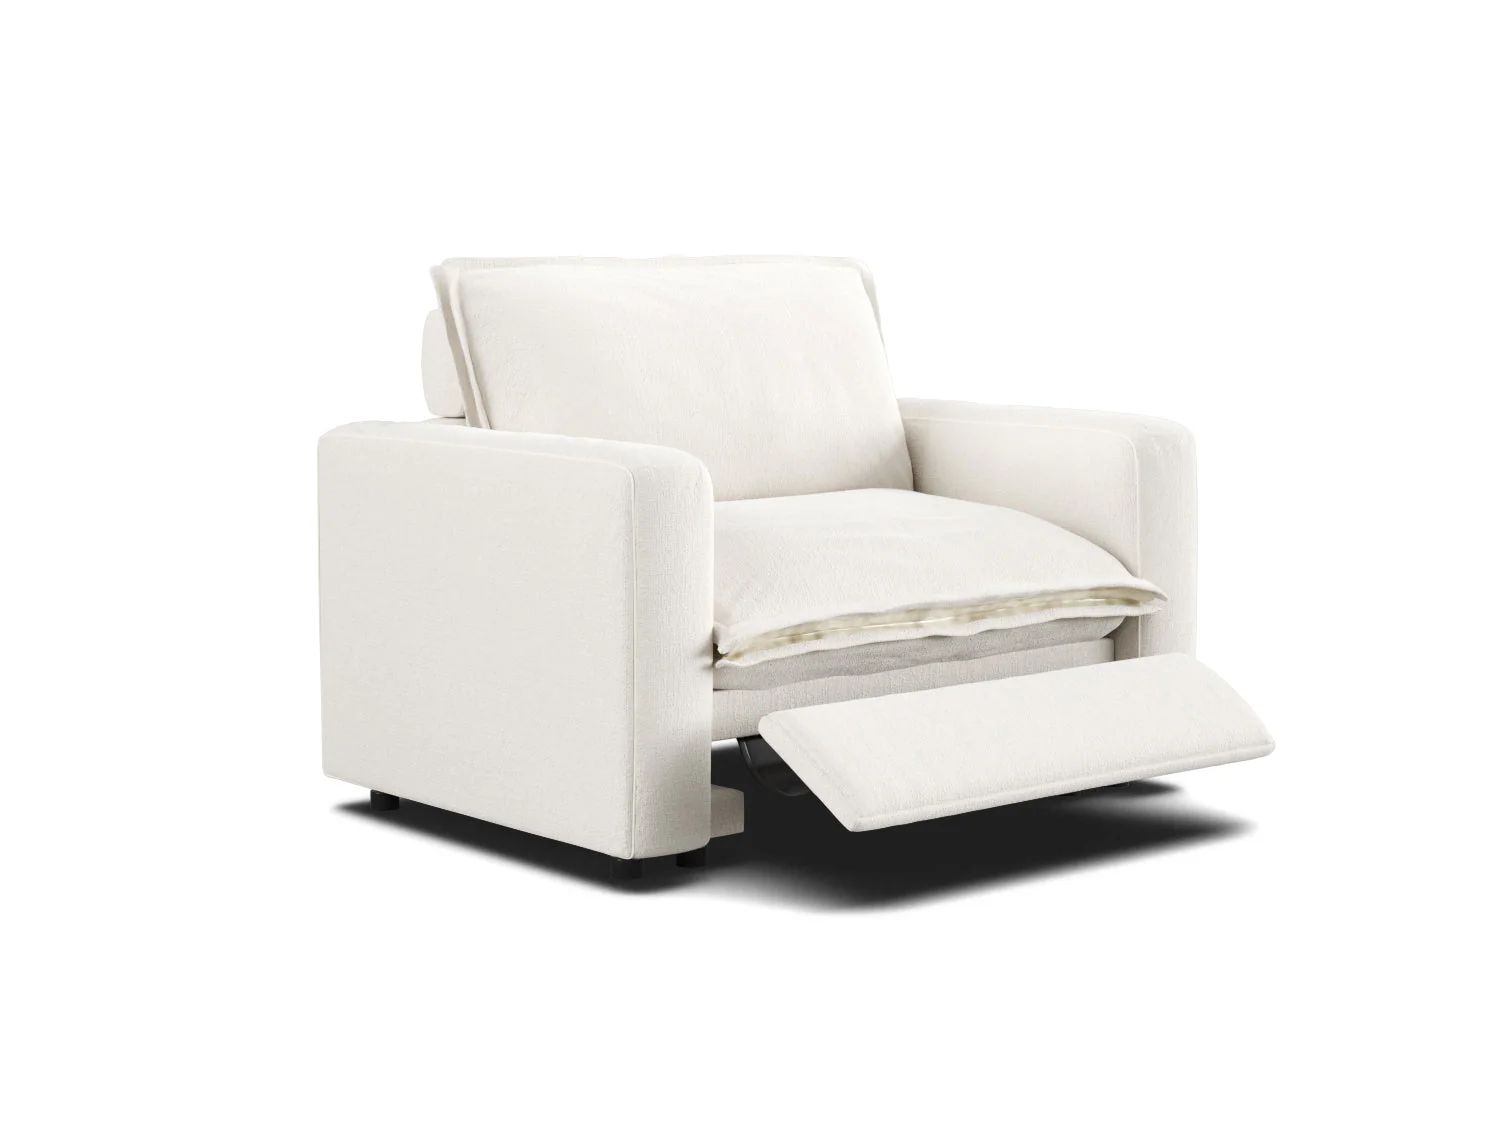 The Recliner | Homebody